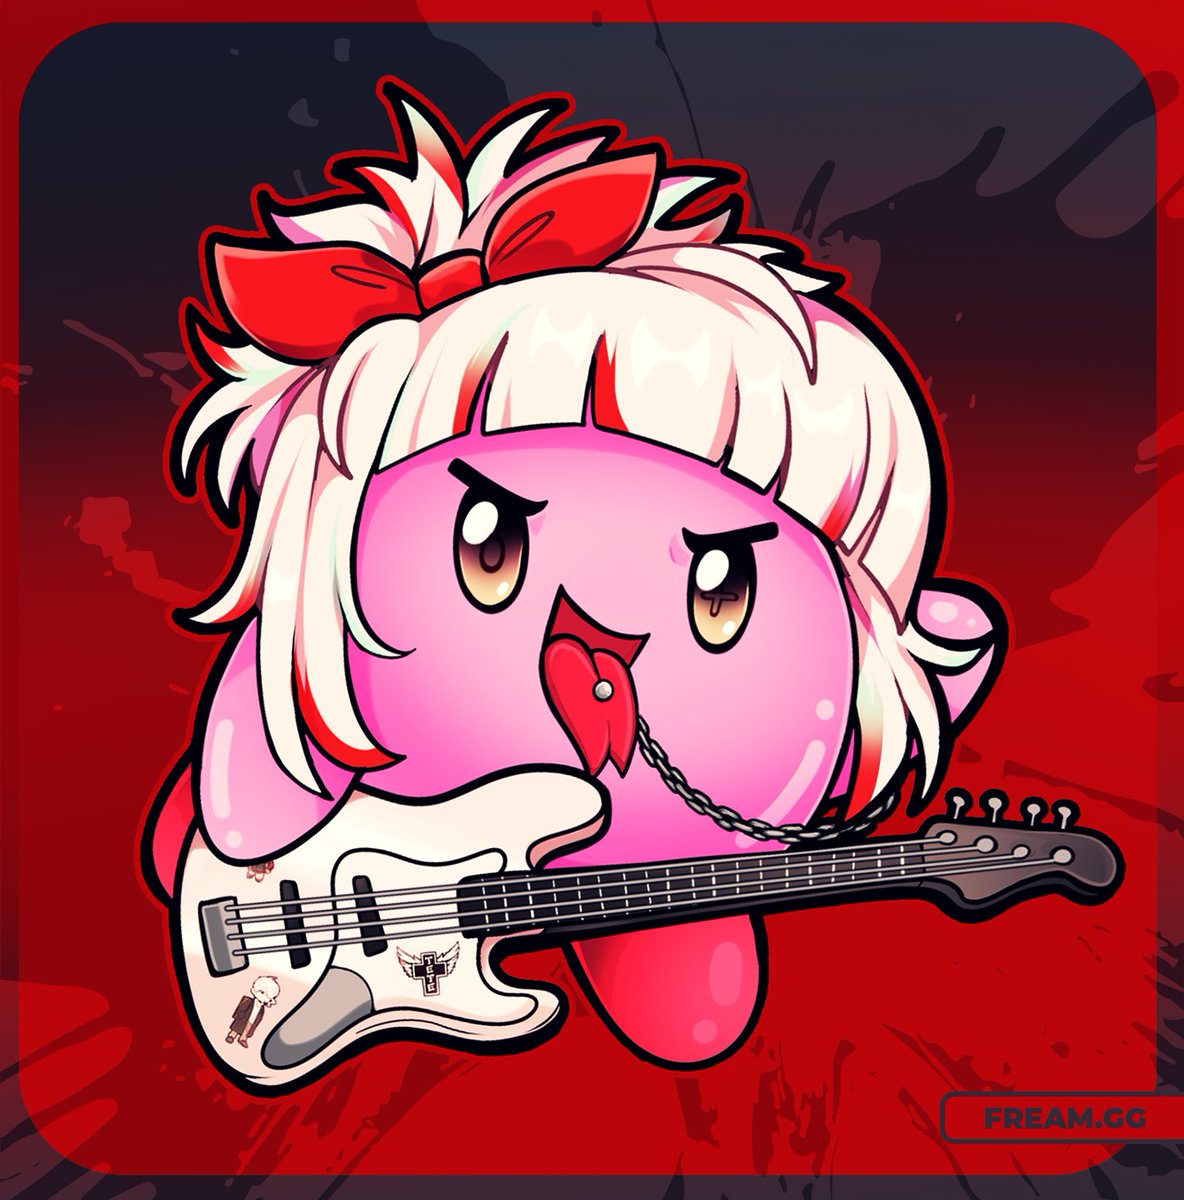 Rocking out! ⚡️ 🎸★ #FeFeArt